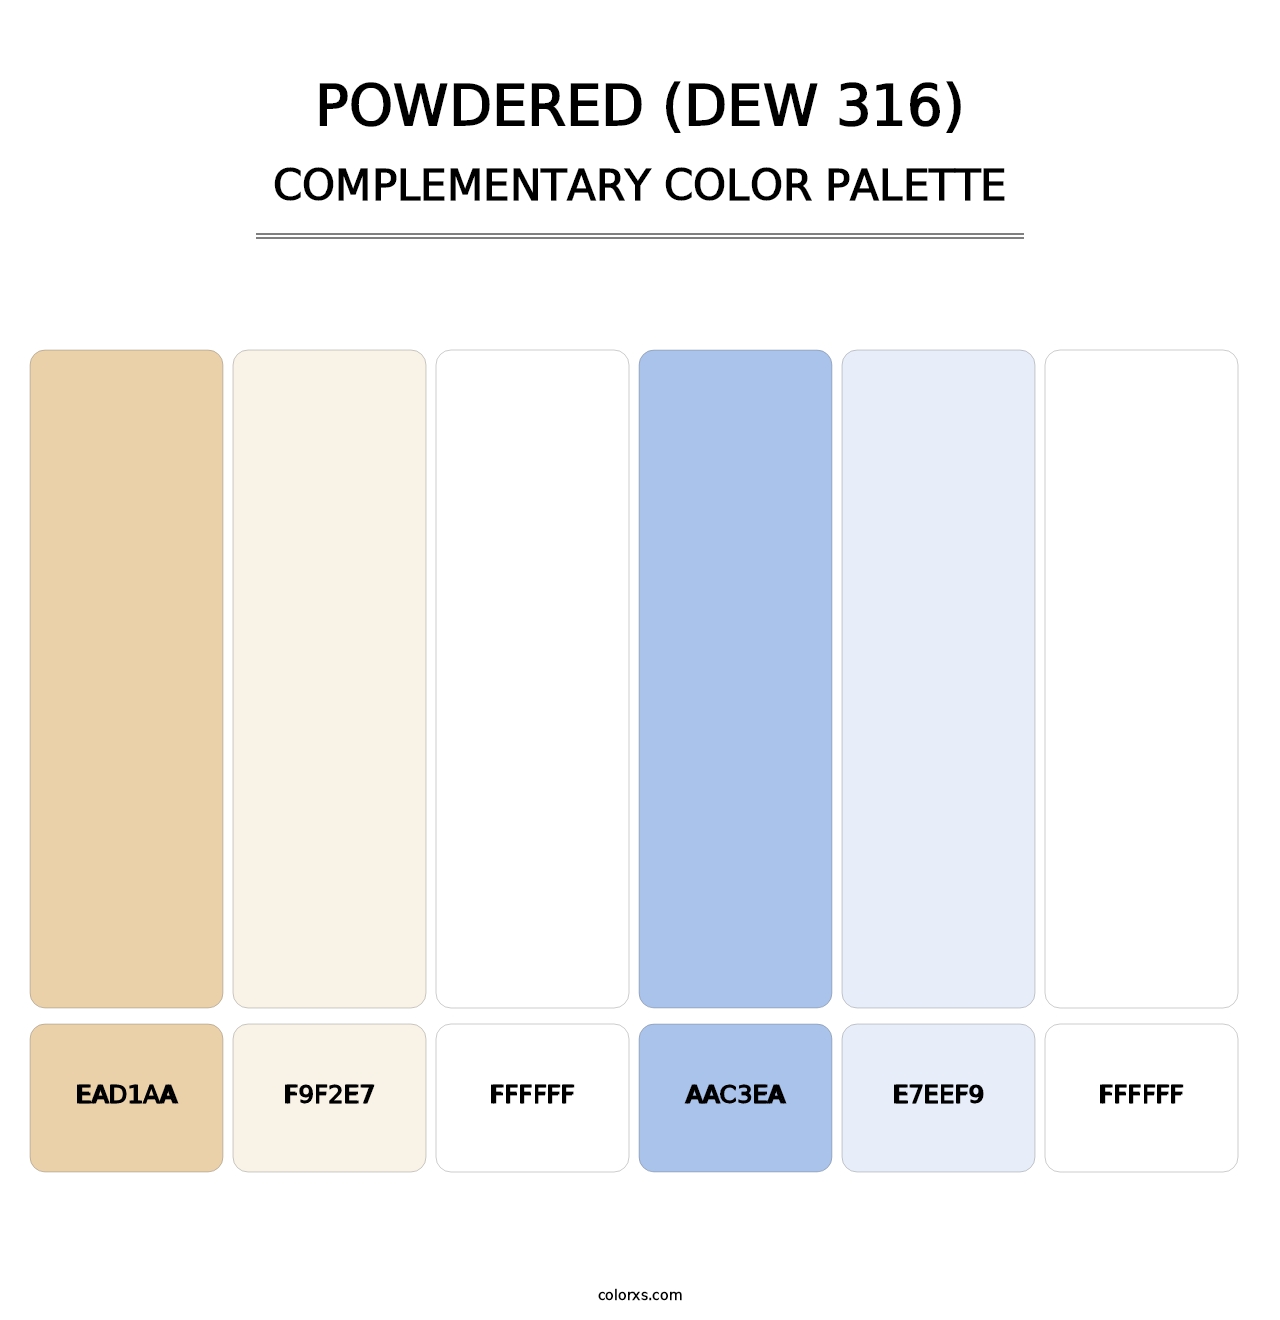 Powdered (DEW 316) - Complementary Color Palette